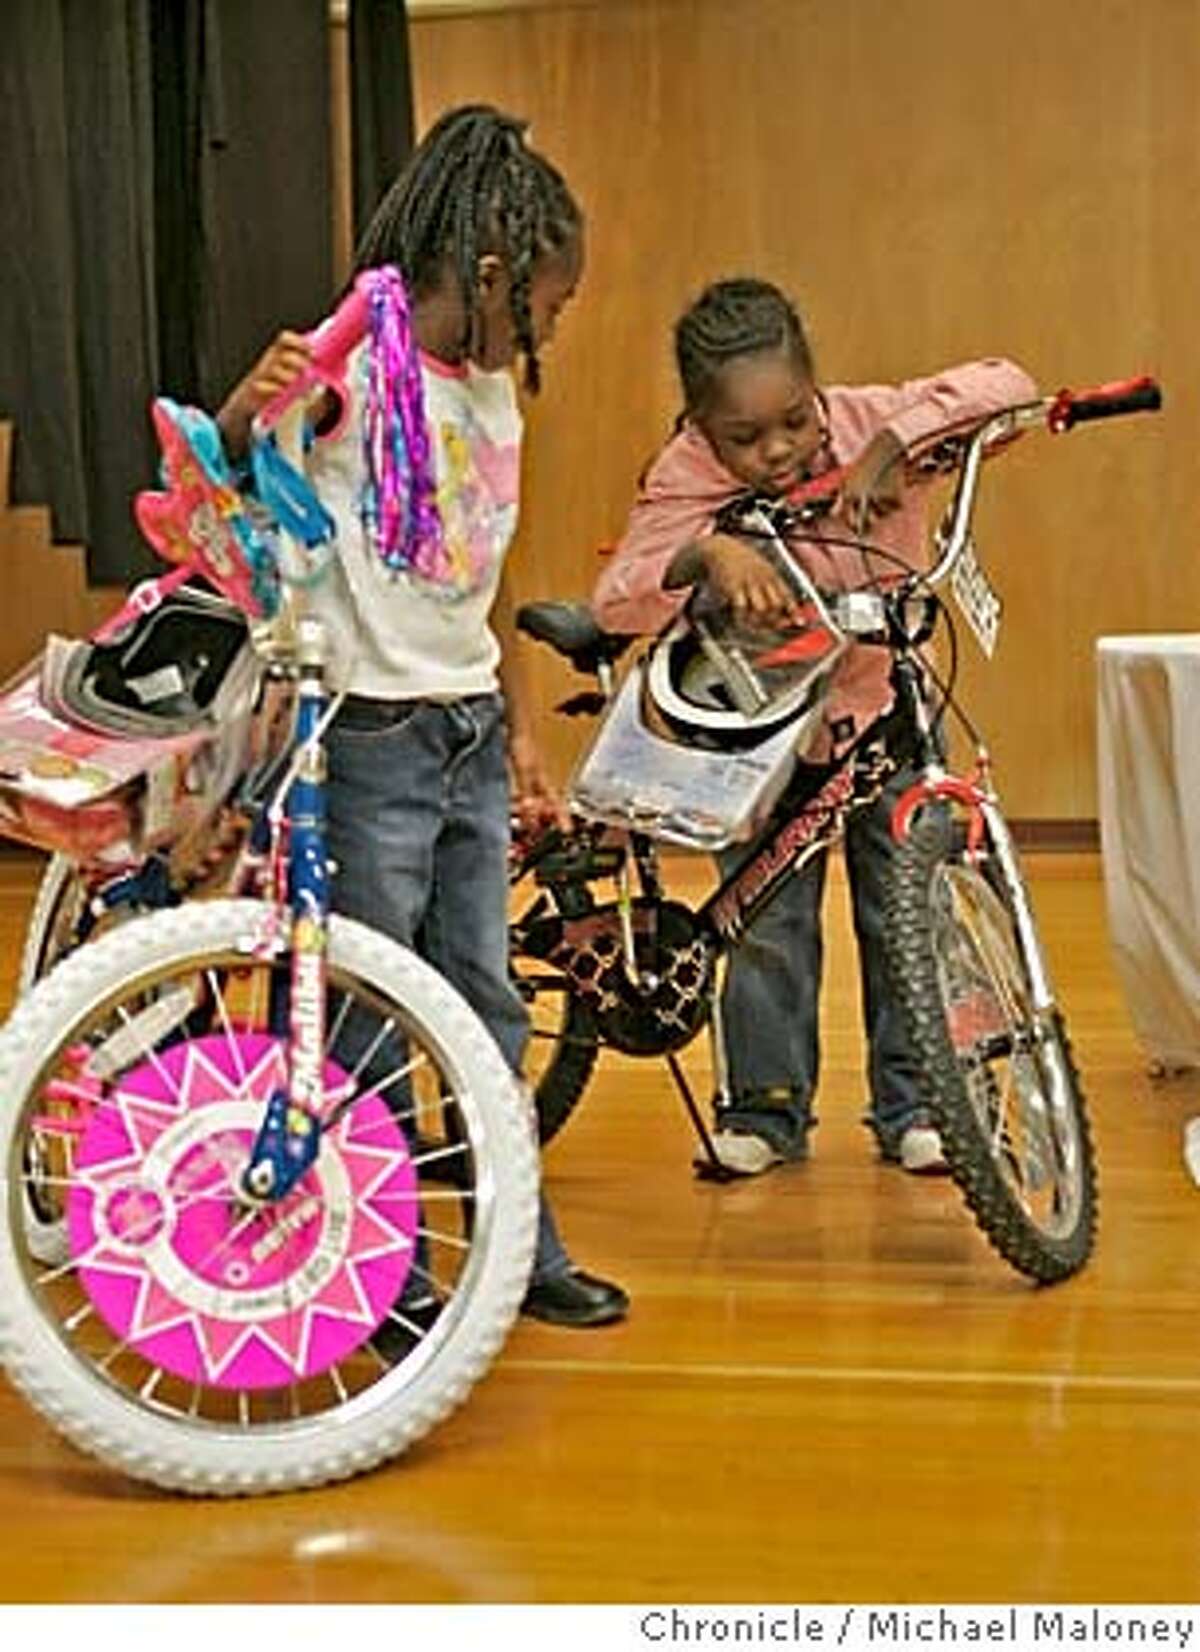 MALCOLMX_064_MJM.jpg Second graders Alexandria Wells (left) and Lonell James check out their new bikes. Malcolm X Academy in Hunters Point has a controversial, yet increasingly popular practice of offering kids big rewards for doing what's expected of them: showing up for school every day, getting decent grades, etc. Malcolm X this morning raffled off fancy bicycles to 4 lucky kids who showed up for school every day for one month. Event in San Francisco, CA Photo by Michael Maloney / The Chronicle MANDATORY CREDIT FOR PHOTOG AND SF CHRONICLE/ -MAGS OUT